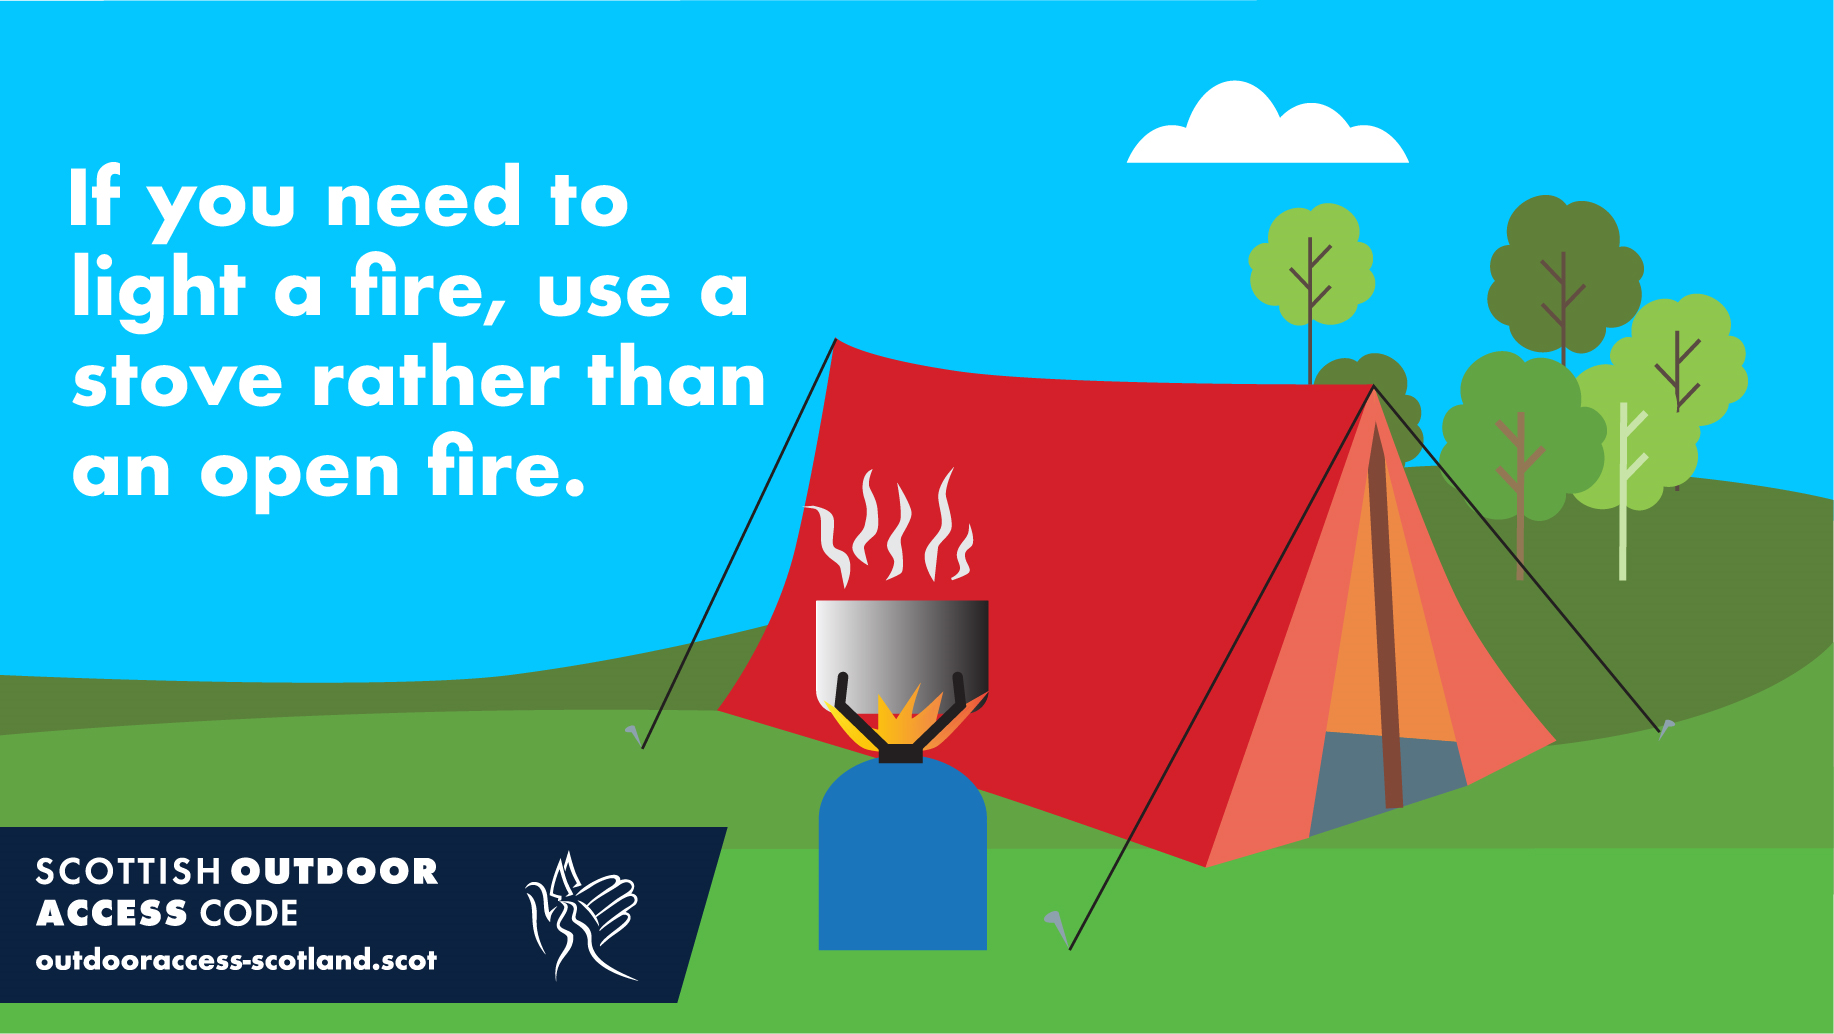 If you need to light a fire, use a stove rather than an open fire.